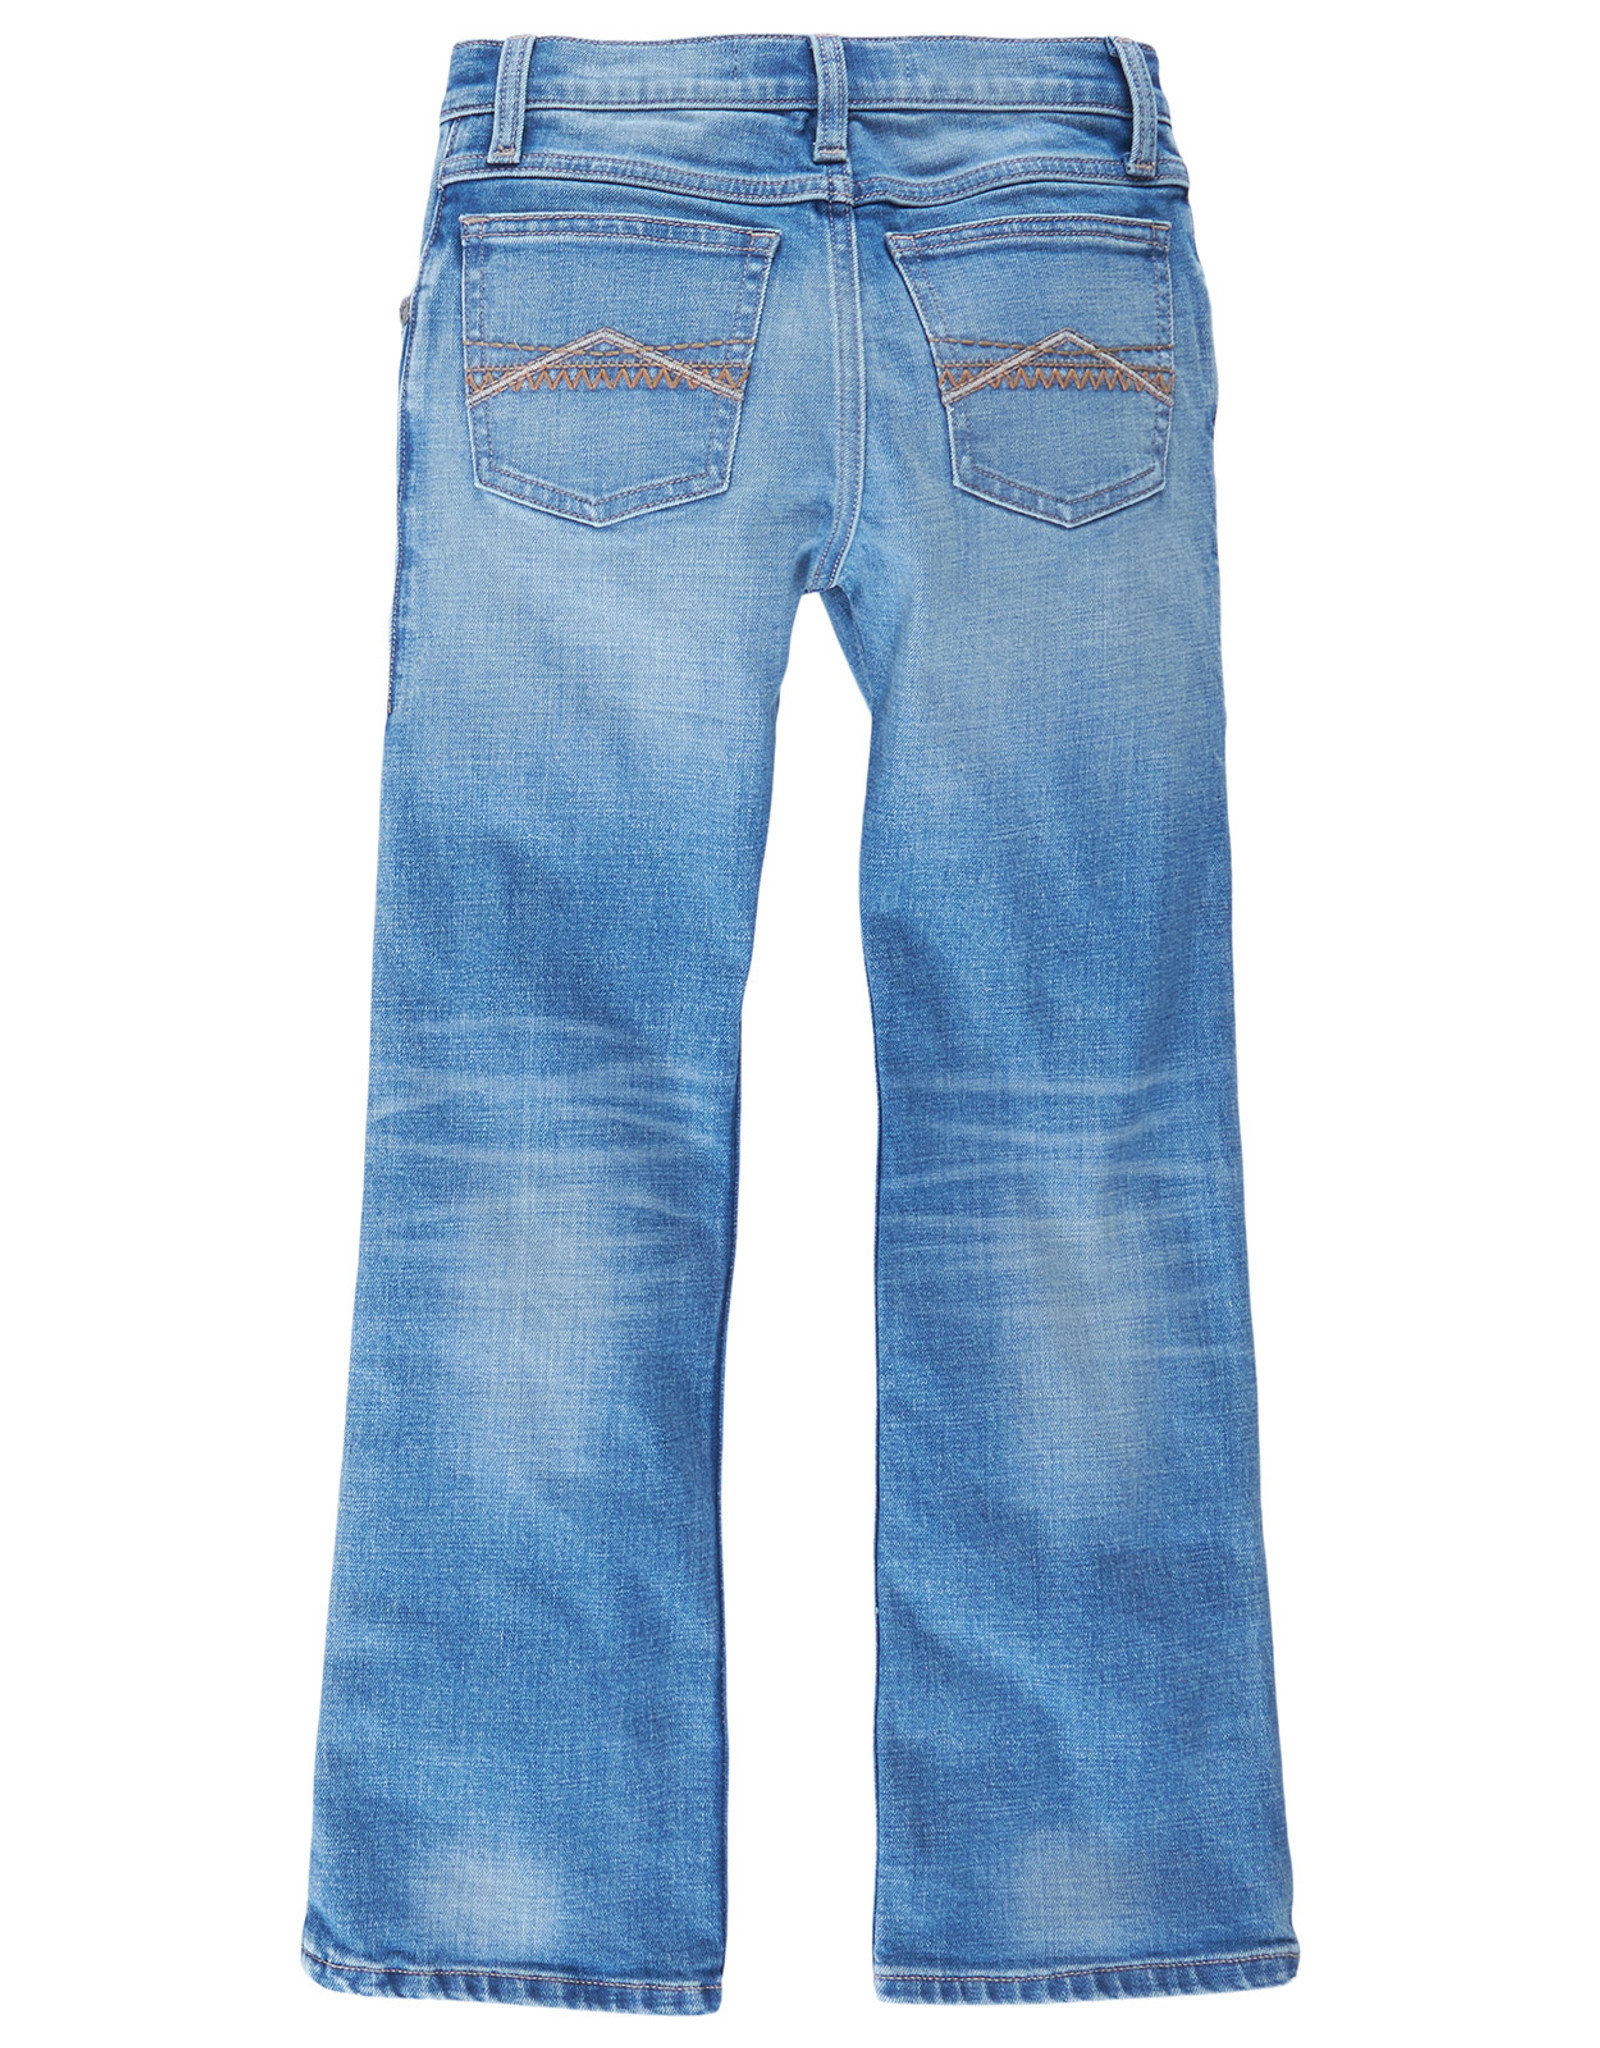 Wrangler Boys' 42 Vintage Stretch Low Rise Slim Fit Boot Cut Jeans (Sizes 1T-20) - Harness (Closeout)